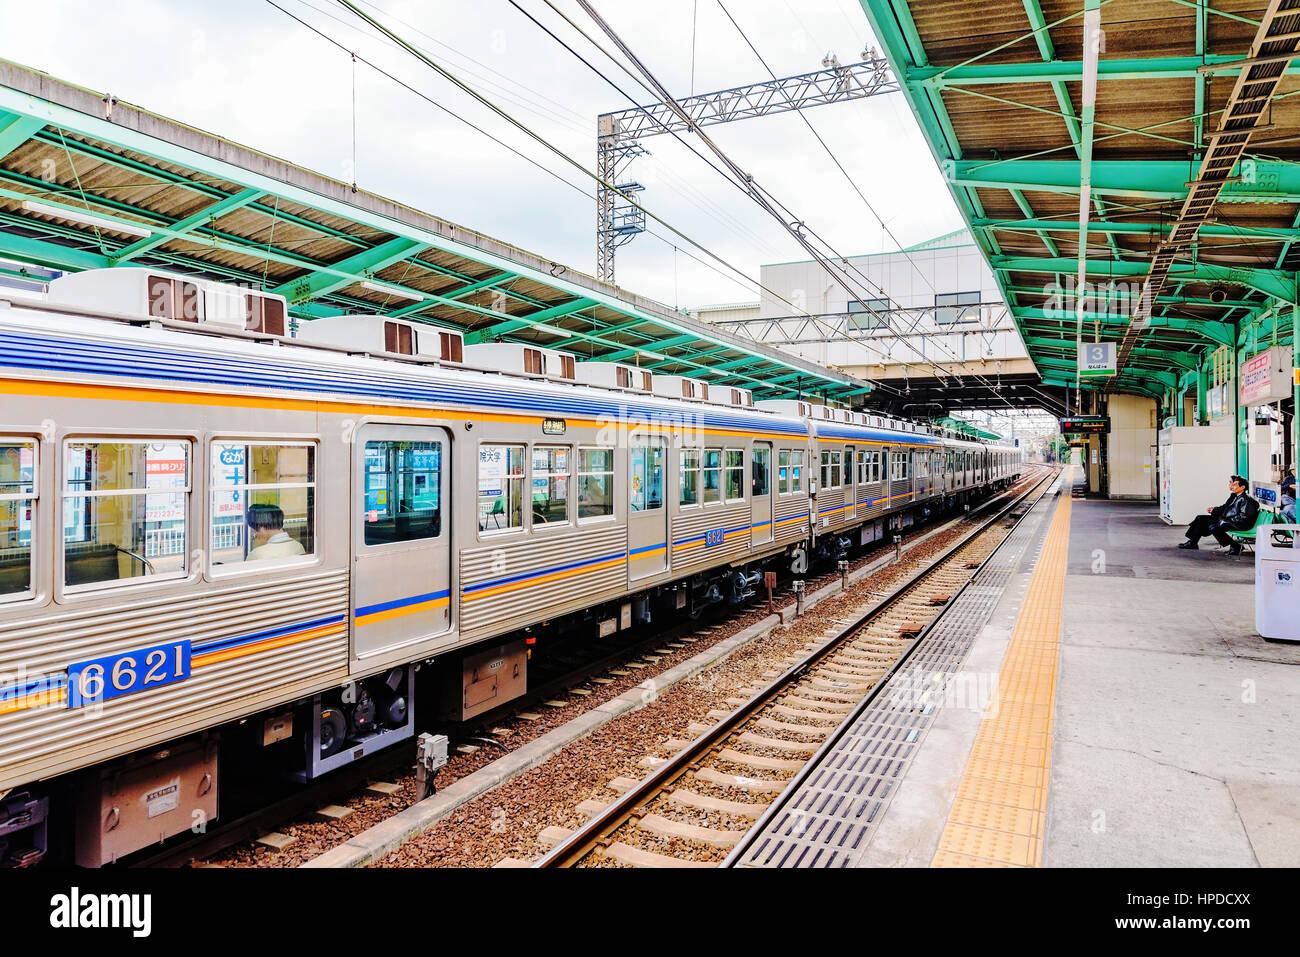 OSAKA, JAPAN - JANUARY 21: Kitanoda railway station on the outskirts of Osaka is a typical Japanese rural railway station which can take people straig Stock Photo